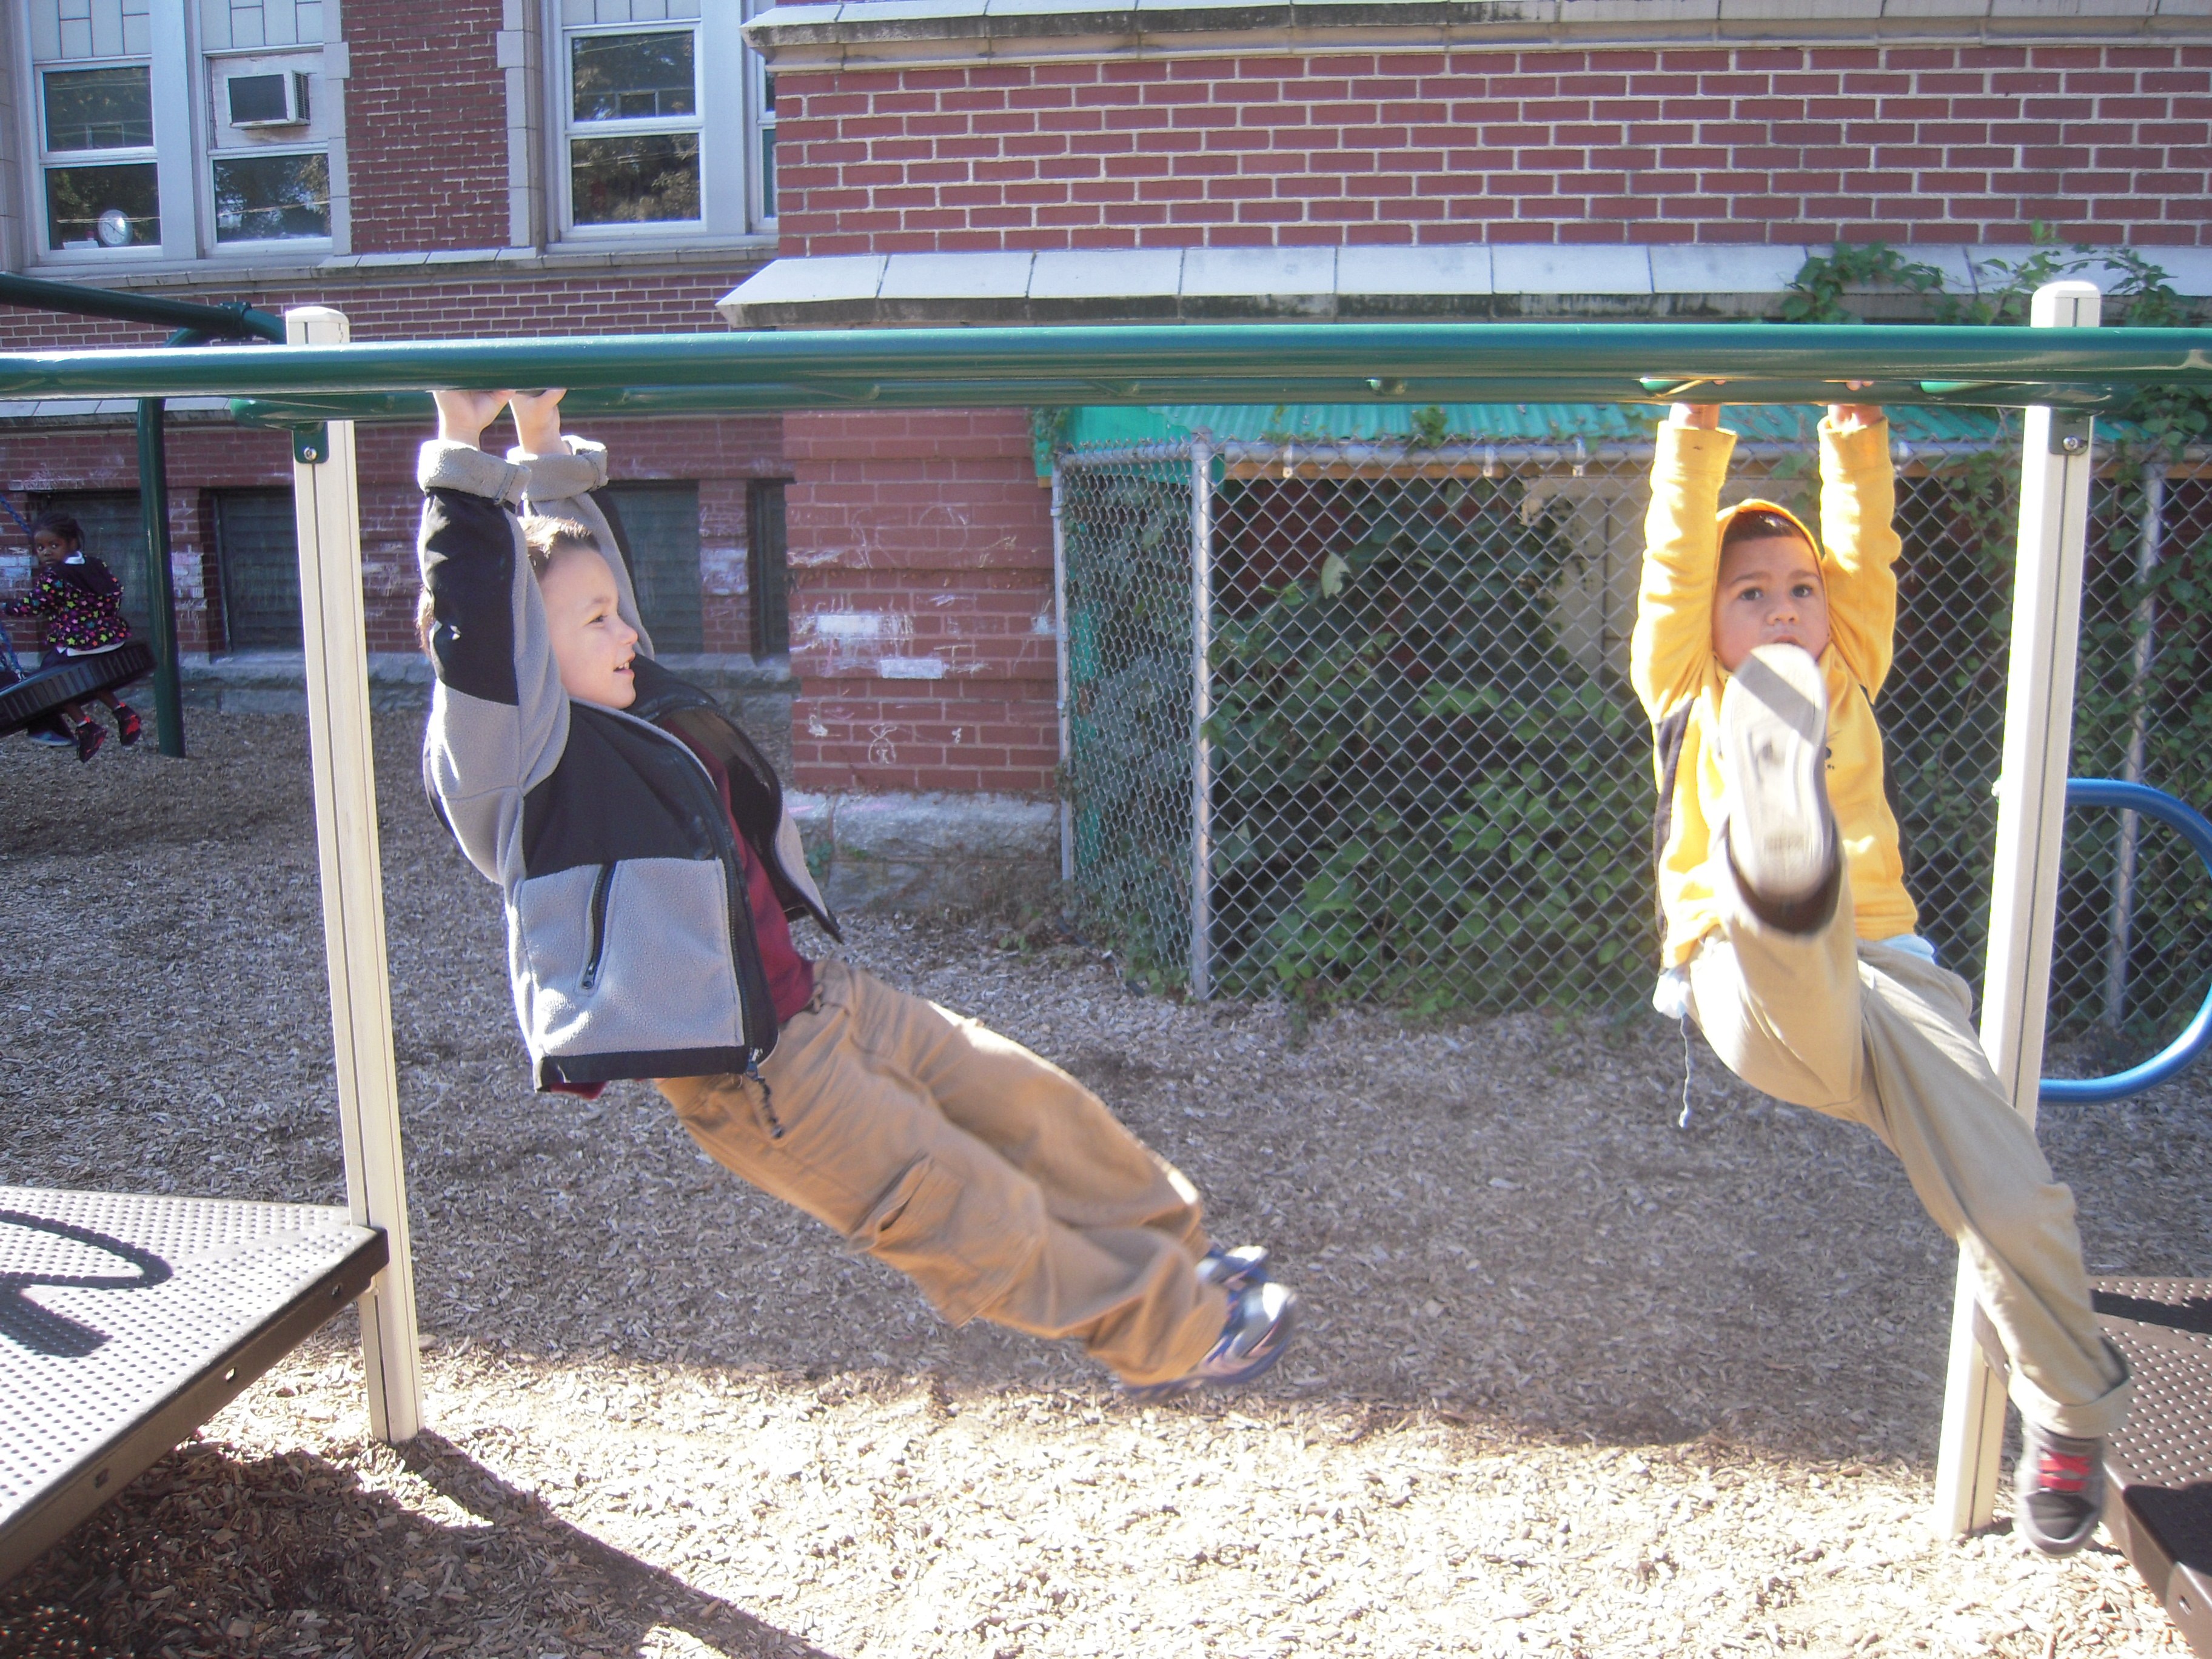 Two young students on playground equipment together